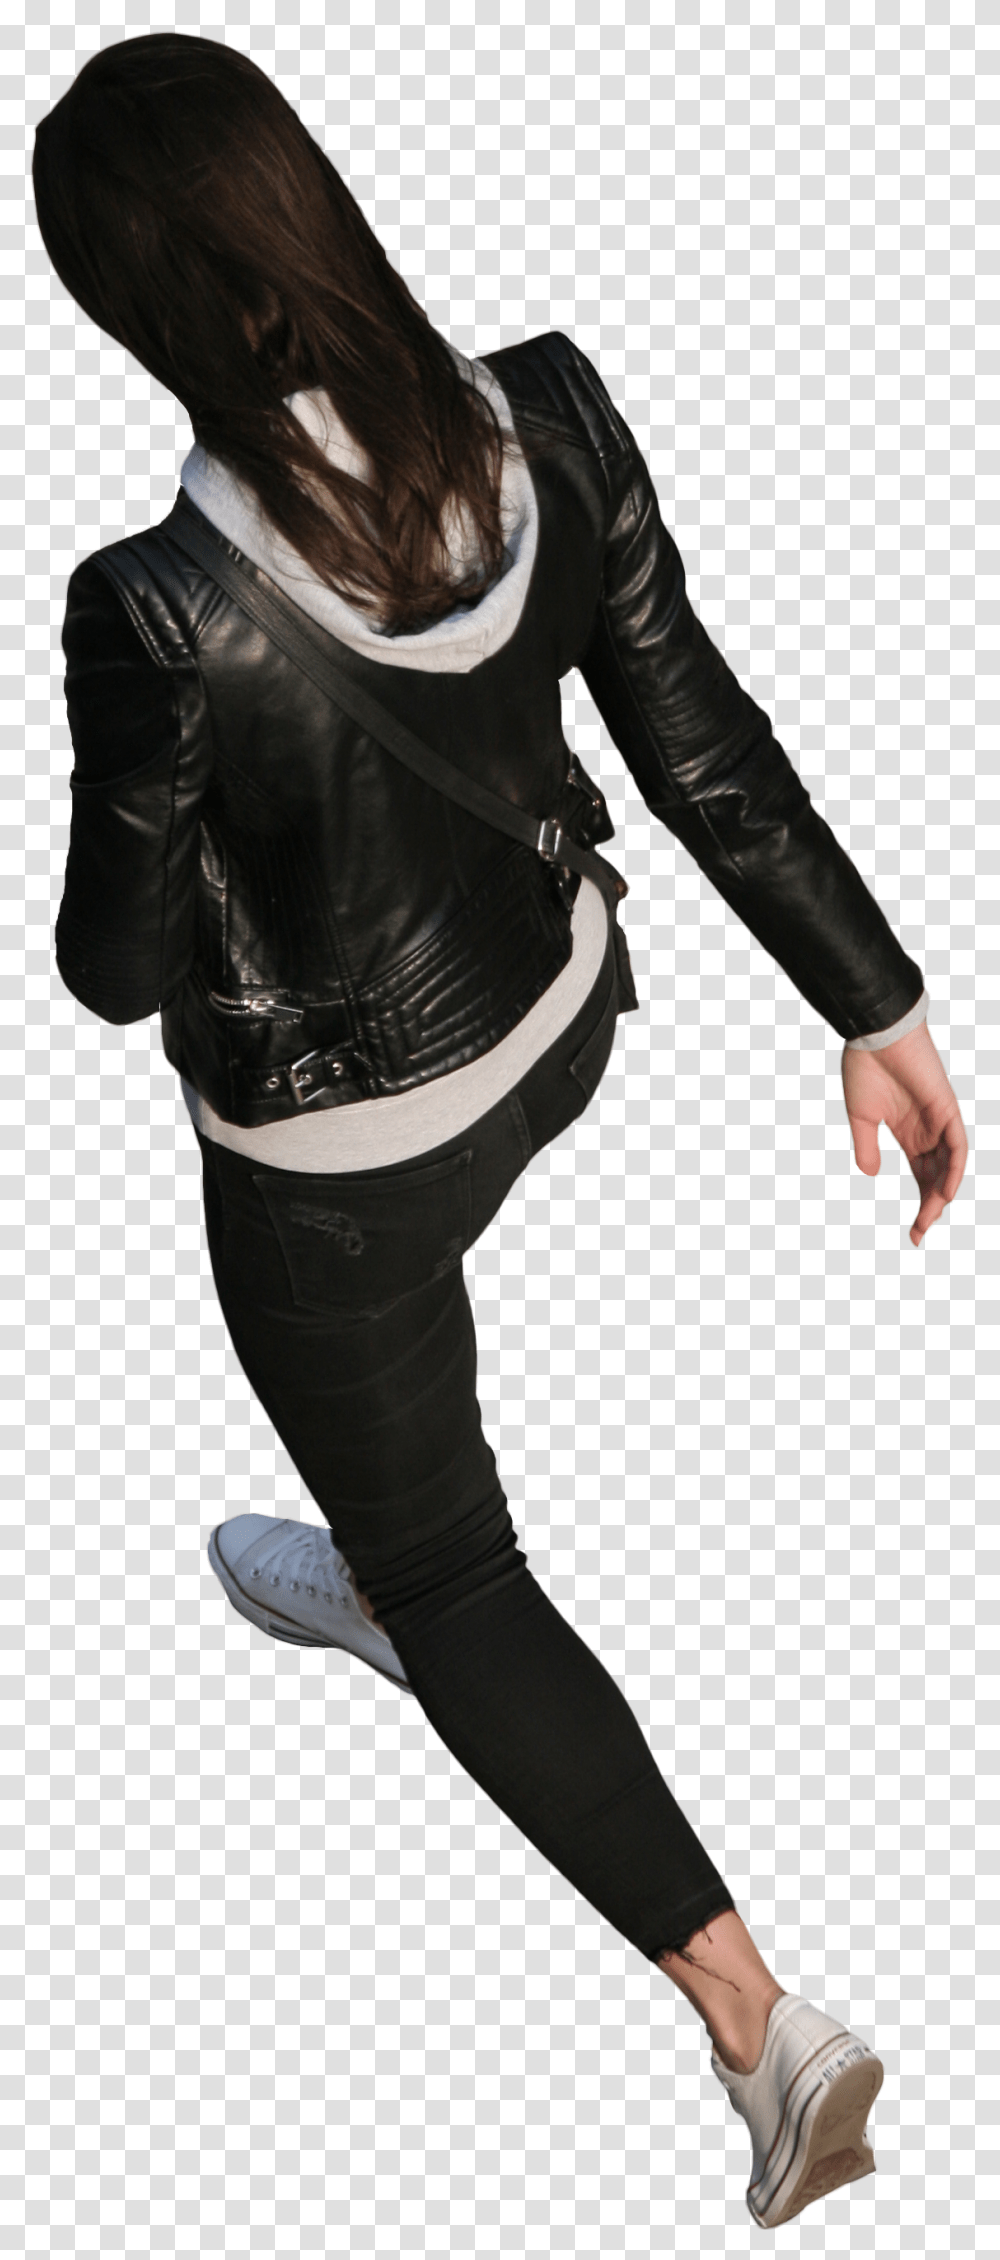 People Top View Cut Out People Top View, Jacket, Coat, Person Transparent Png